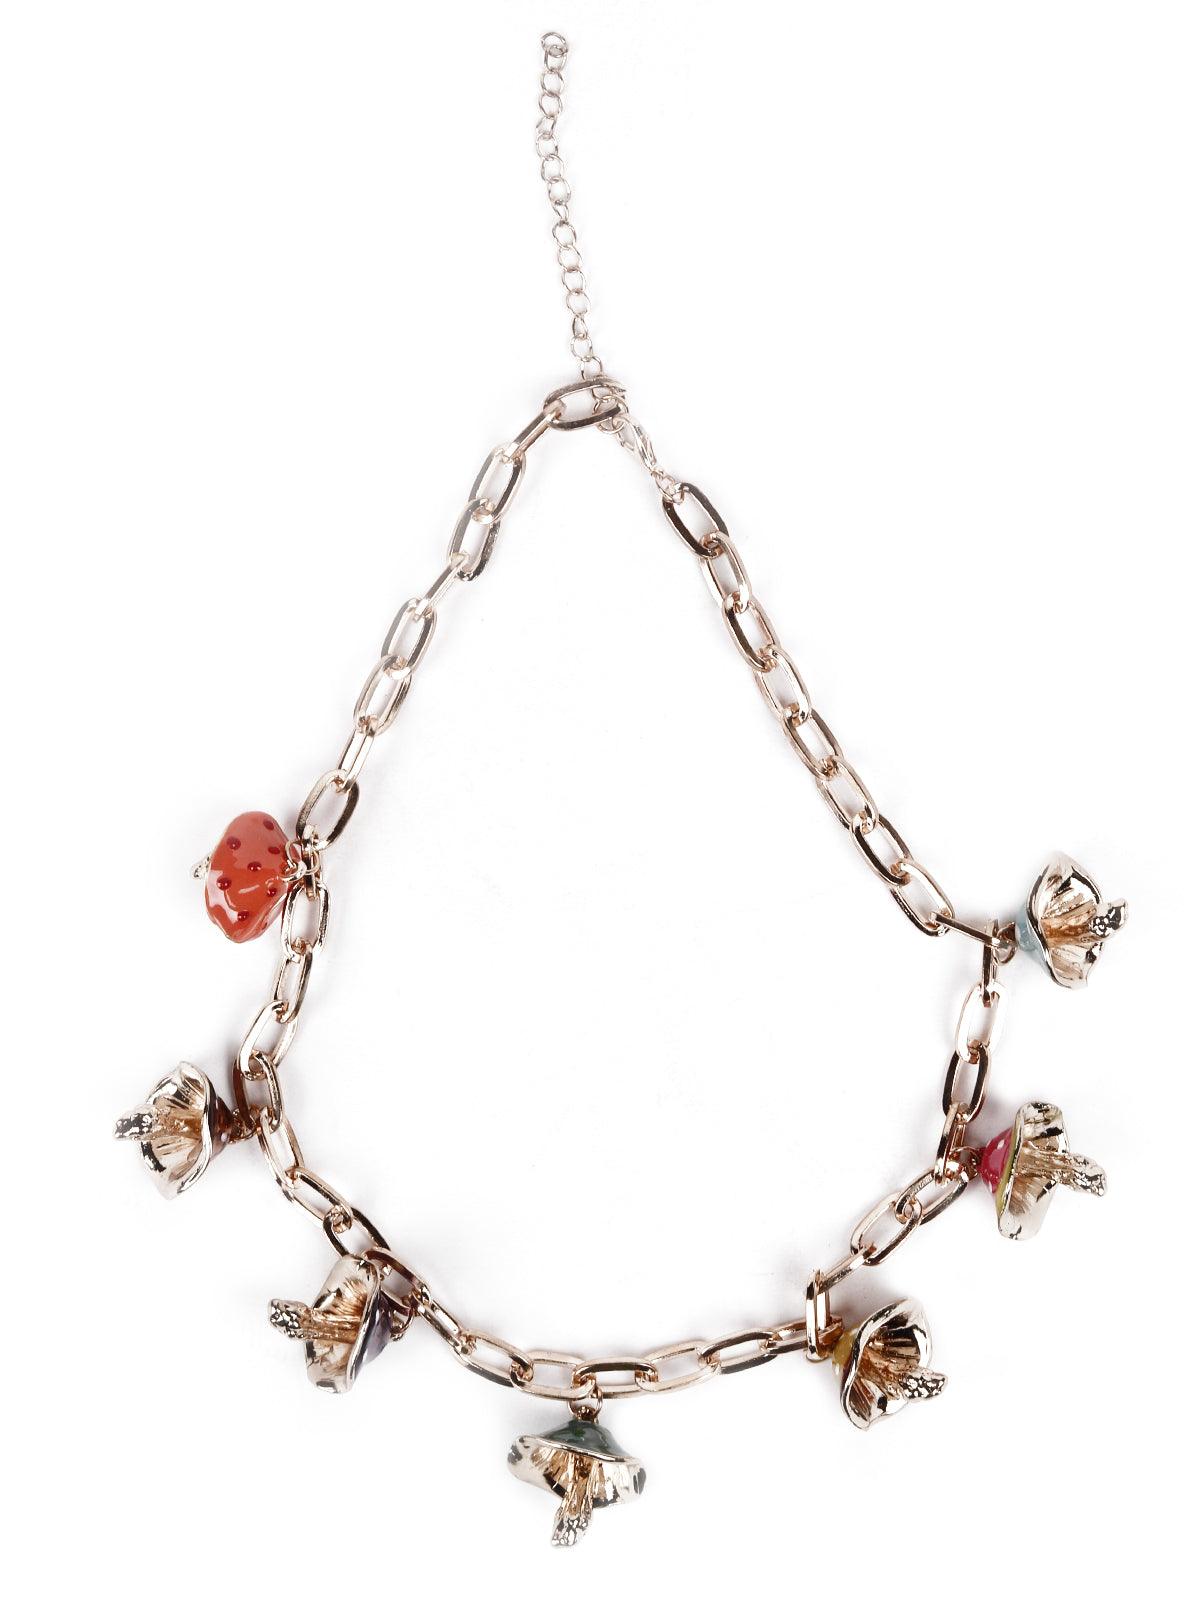 Women's Gold-Tone Chained Necklace Embellished With Charms - Odette